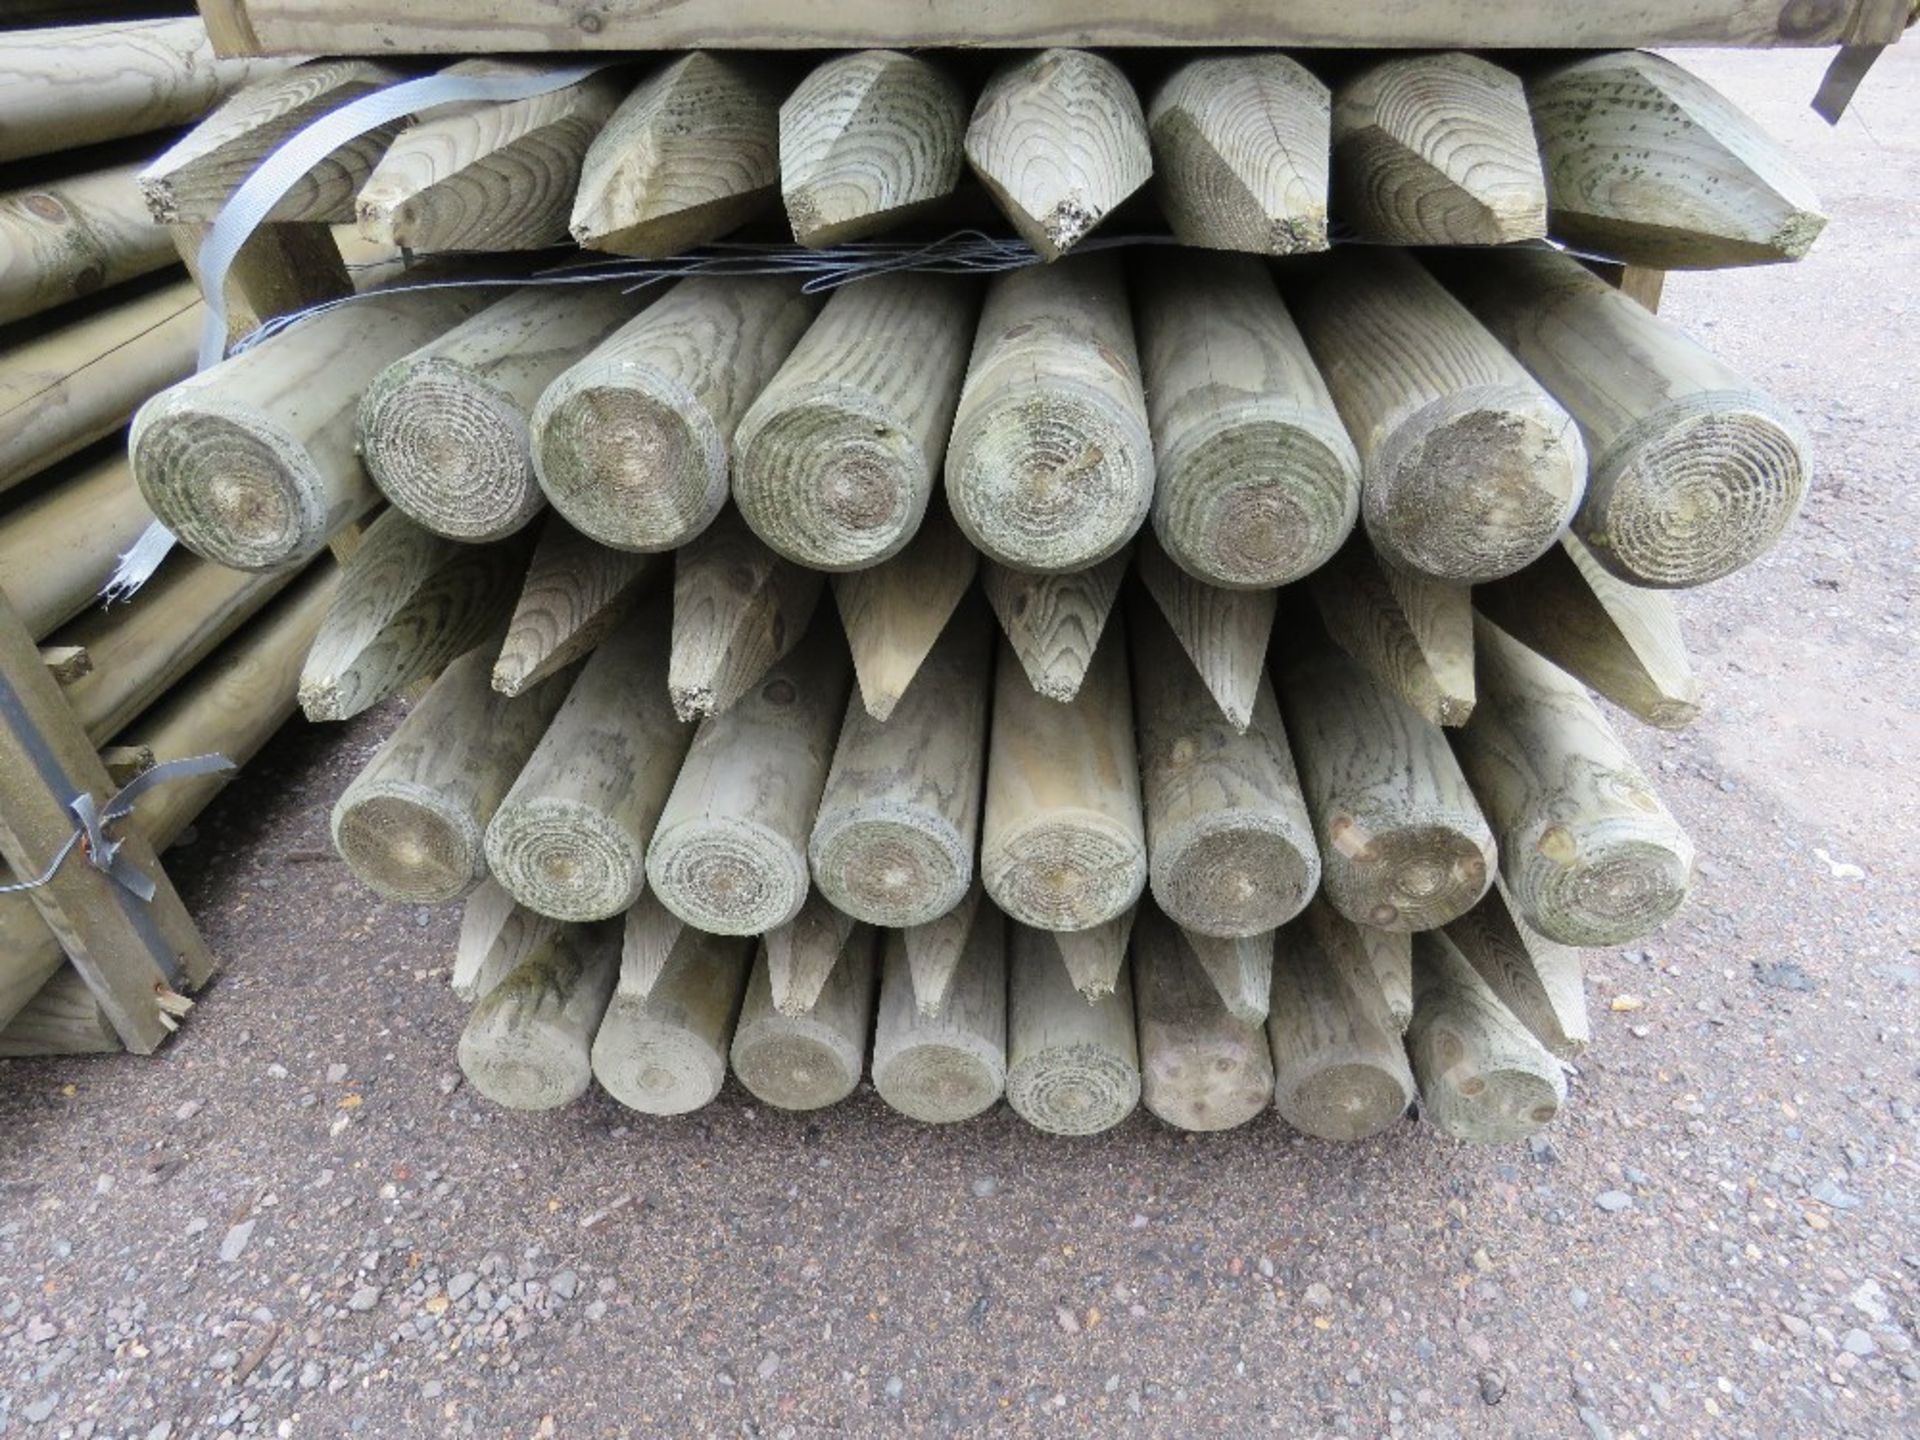 48 X TREATED TIMBER FENCING STAKES 5FT LENGTH APPROX X 9CM DIAMETER. - Image 3 of 3